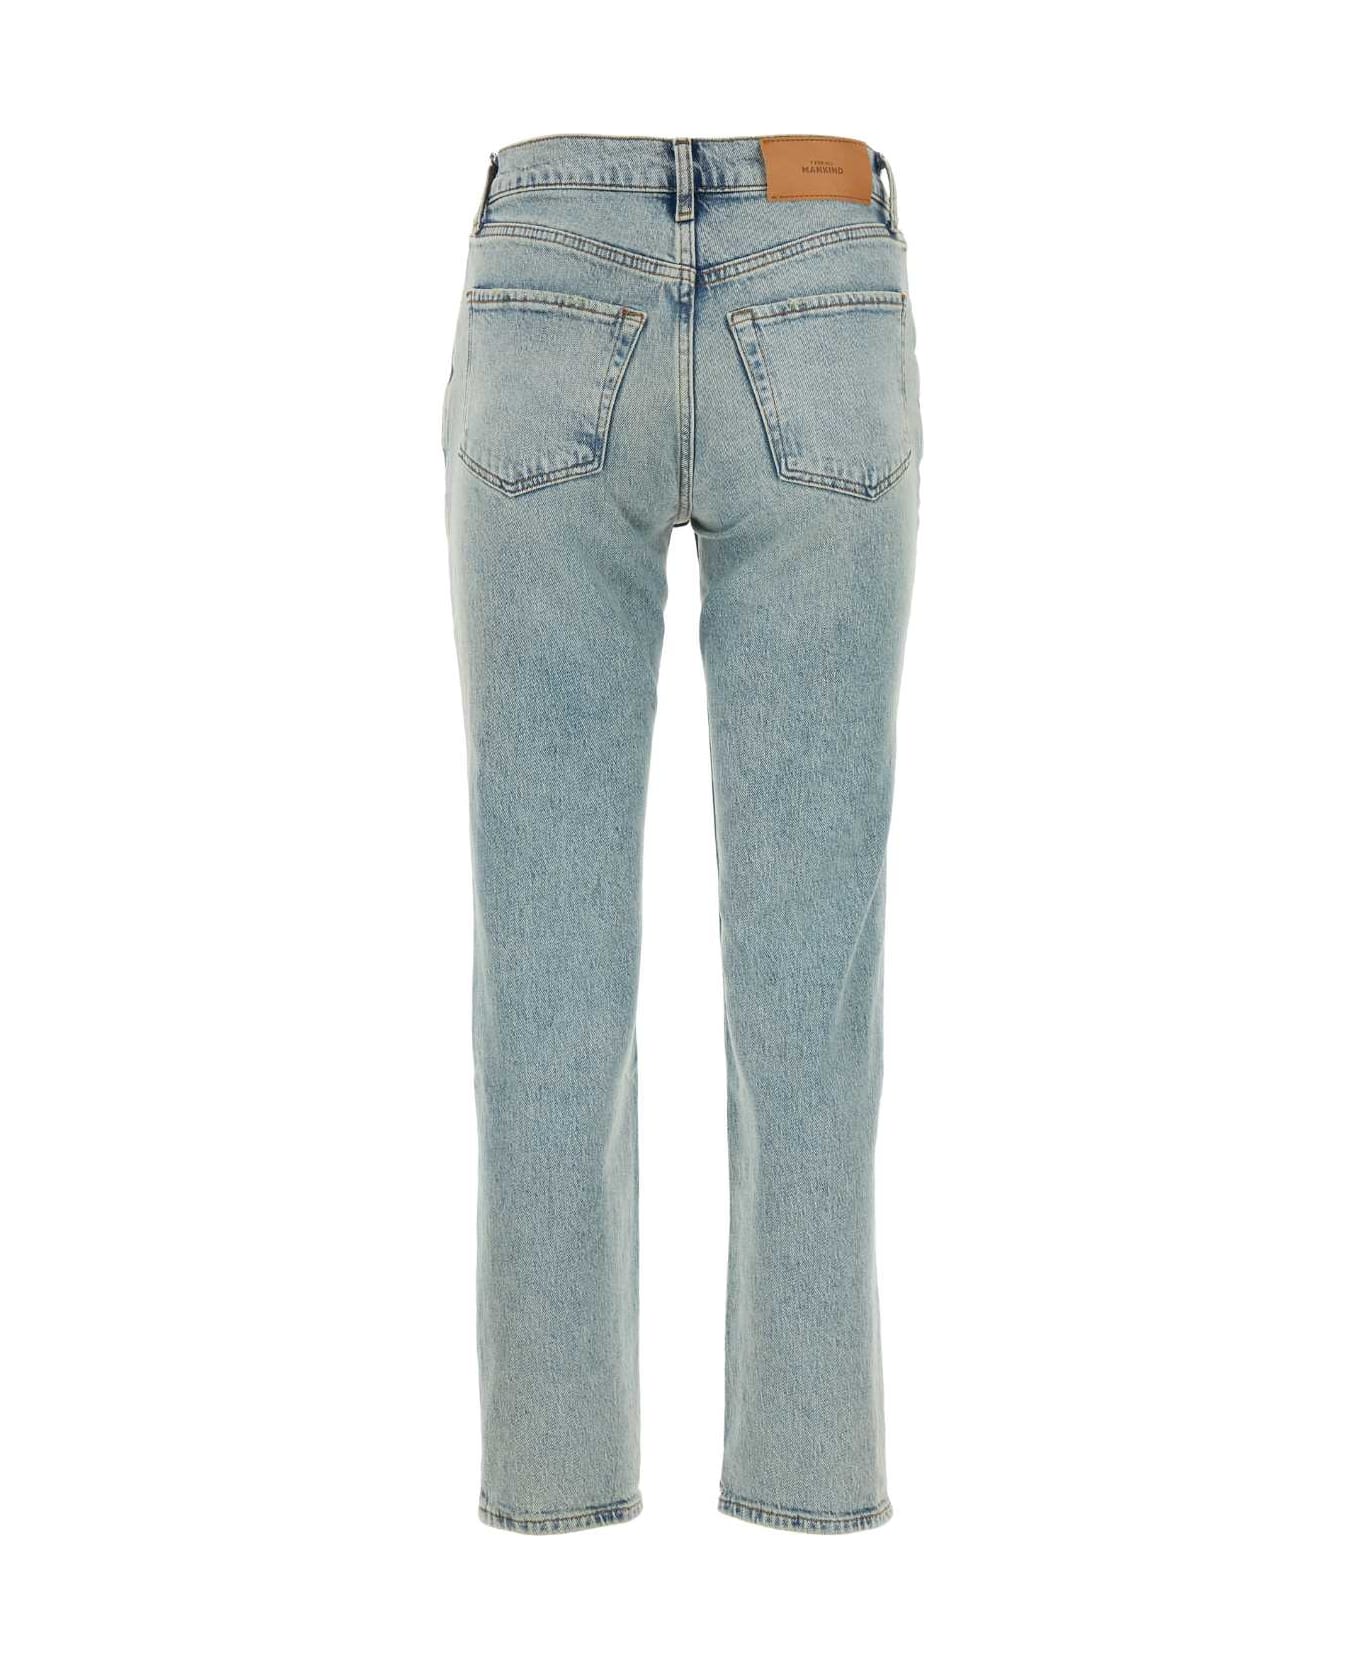 7 For All Mankind Light Blue Stretch Denim Jeans - LAVAGGIOTHE